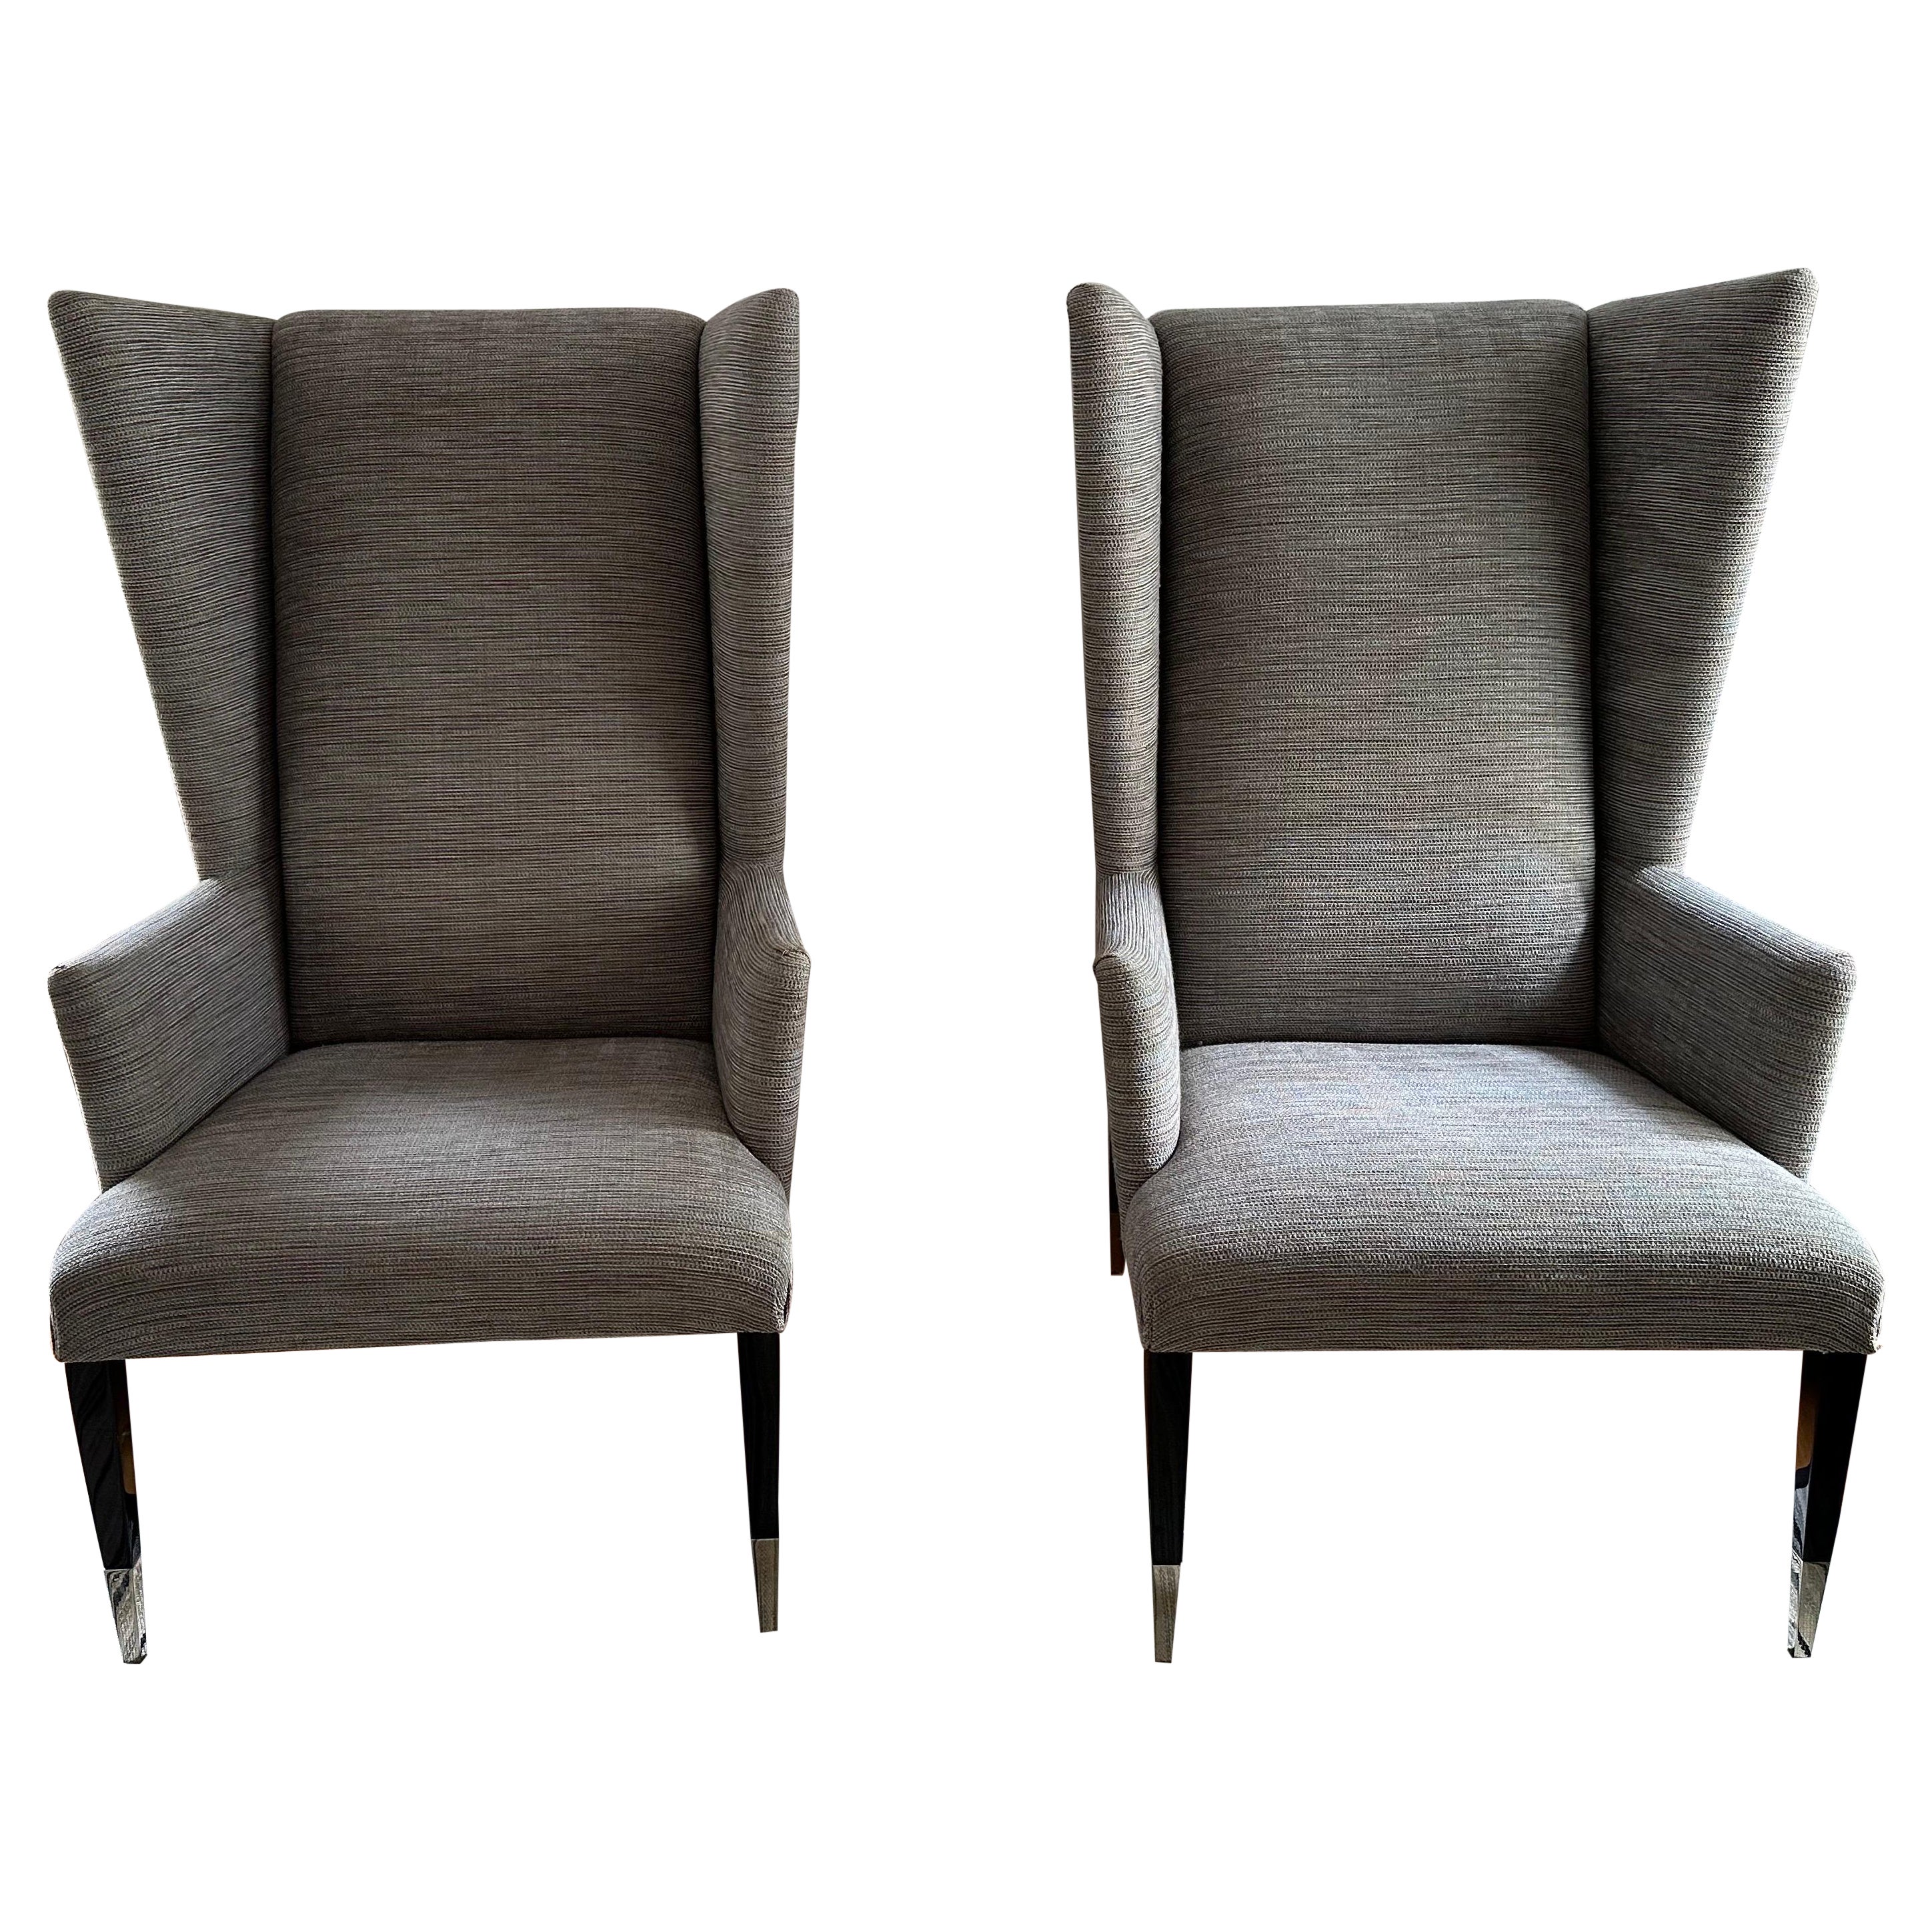 Large Pair of Contemporary Wingback Chairs by J. Robert Scott For Sale